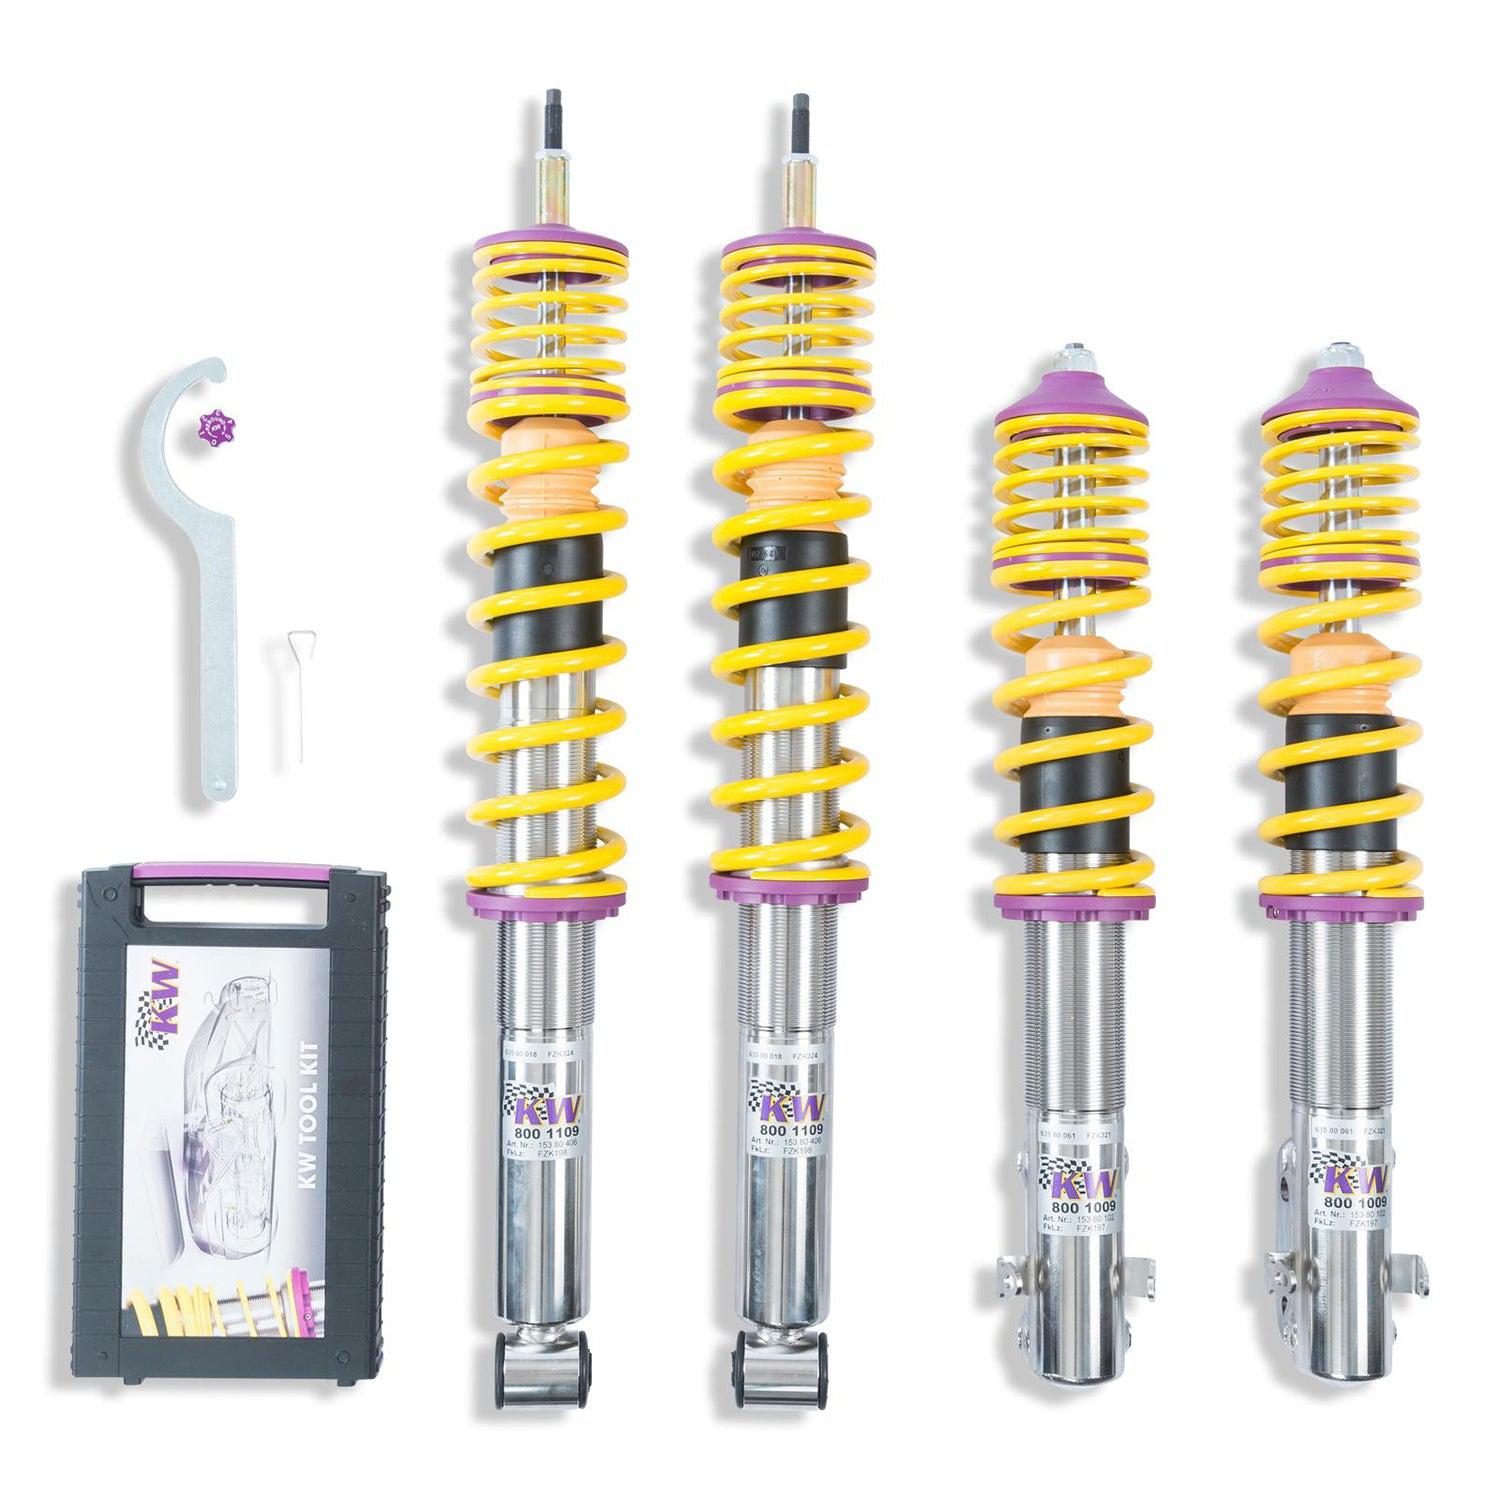 KW BMW M340i/M340d/330d xDrive V2 Coilover Kit (G20) without EDC Deactivation-R44 Performance